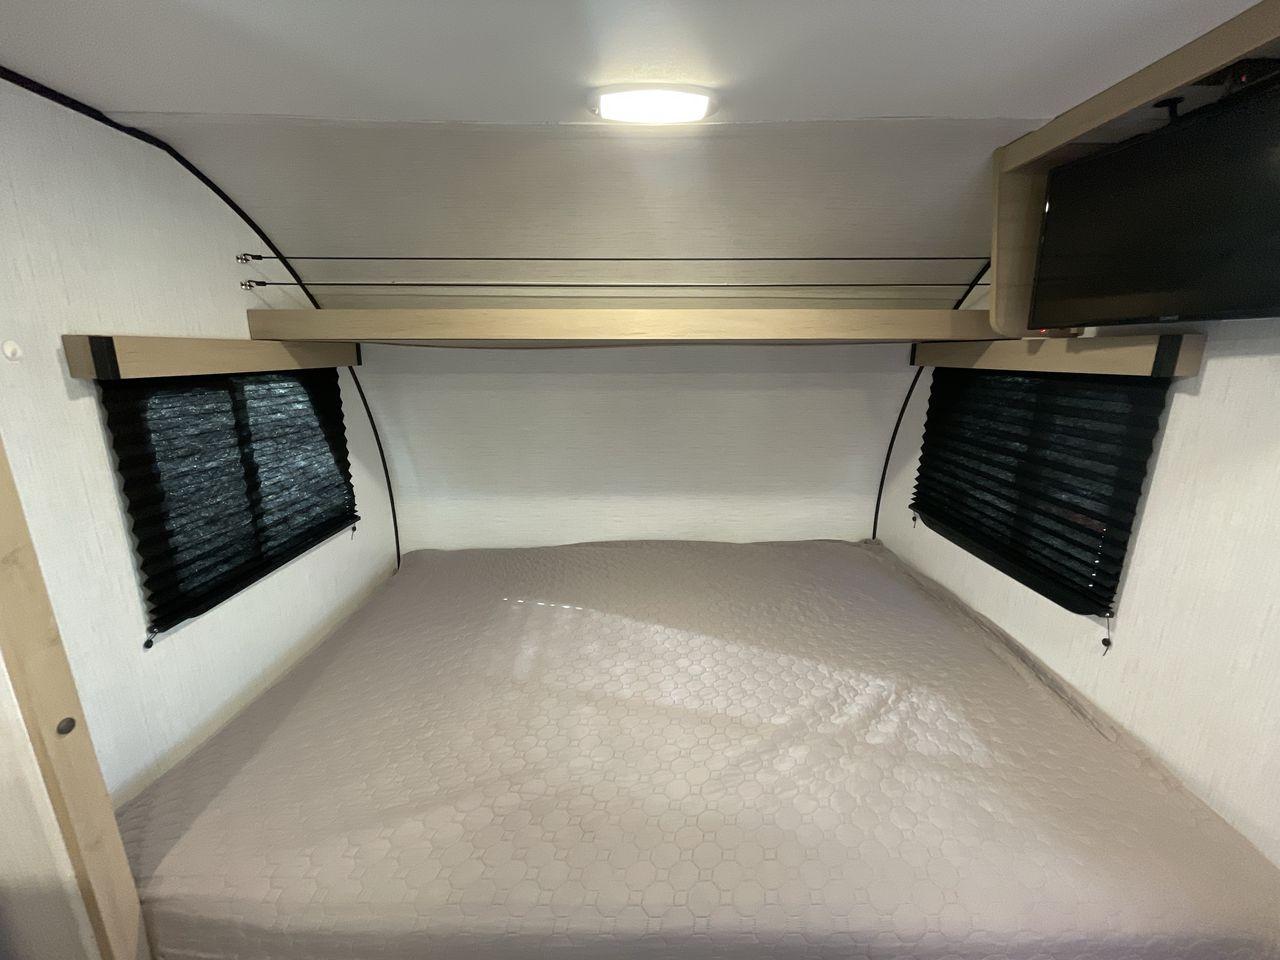 2022 CRUISER RV HITCH 18BHS (5RXRB2319N1) , Length: 22 ft | Dry Weight: 4,030 lbs | Gross Weight: 5,000 lbs | Slides: 1 transmission, located at 4319 N Main St, Cleburne, TX, 76033, (817) 678-5133, 32.385960, -97.391212 - The 2022 Cruiser RV Corp Hitch 18BHS is a compact yet feature-packed travel trailer perfect for those who value comfort and convenience during their travels. Featuring a sleek and modern exterior design, this lightweight trailer measures approximately 22 feet in length, making it easy to tow and man - Photo #18